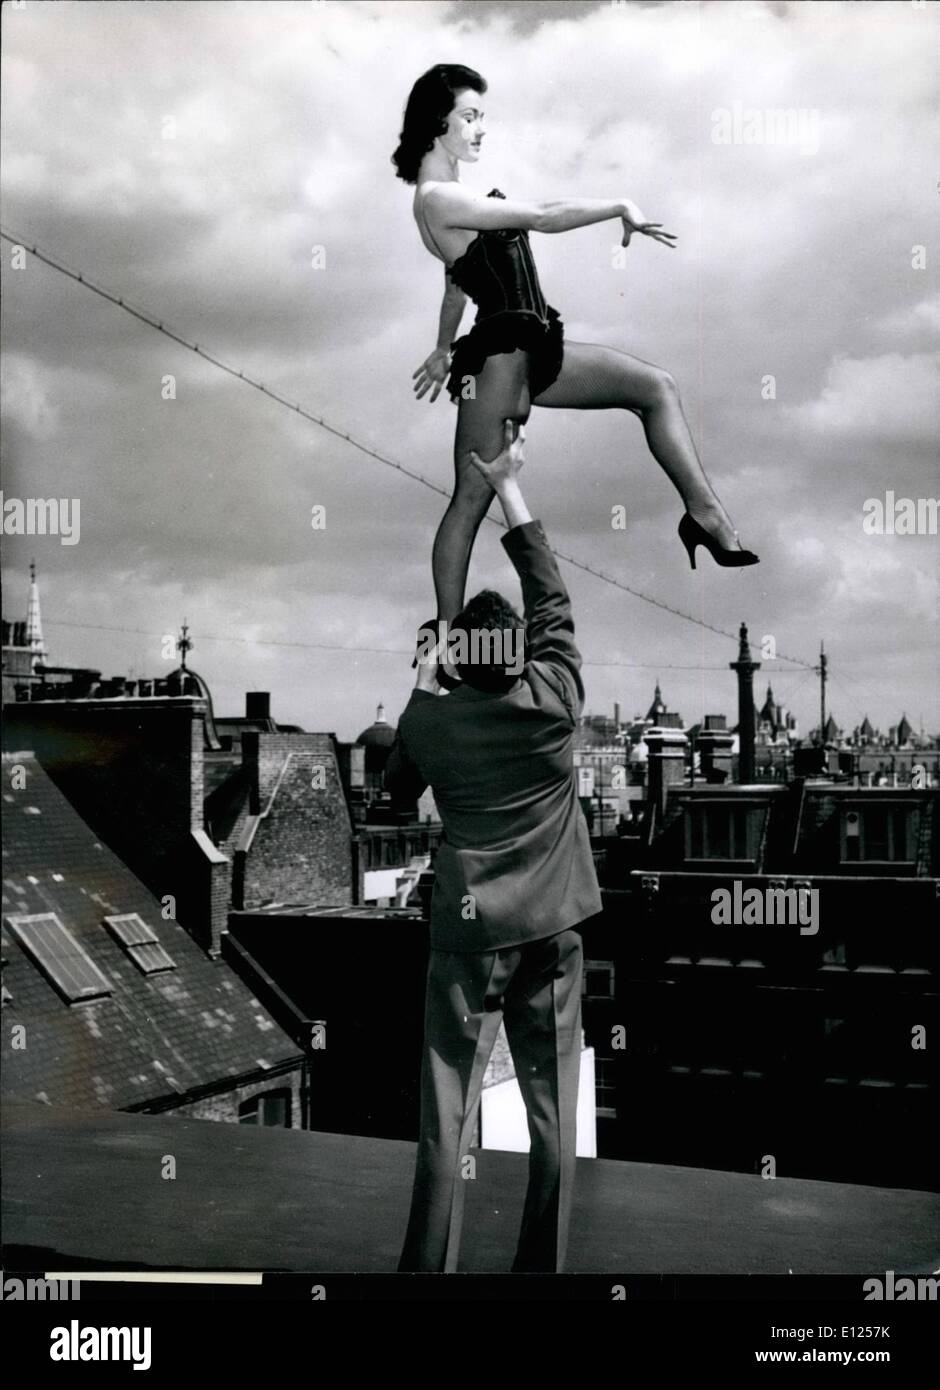 Mar. 03, 1987 - Another attractive statue is added to the London skyline as pretty Marian Morris is lifted aloft by one of her partners. She looks as if she is about to step onto Nelson's Column. Stock Photo